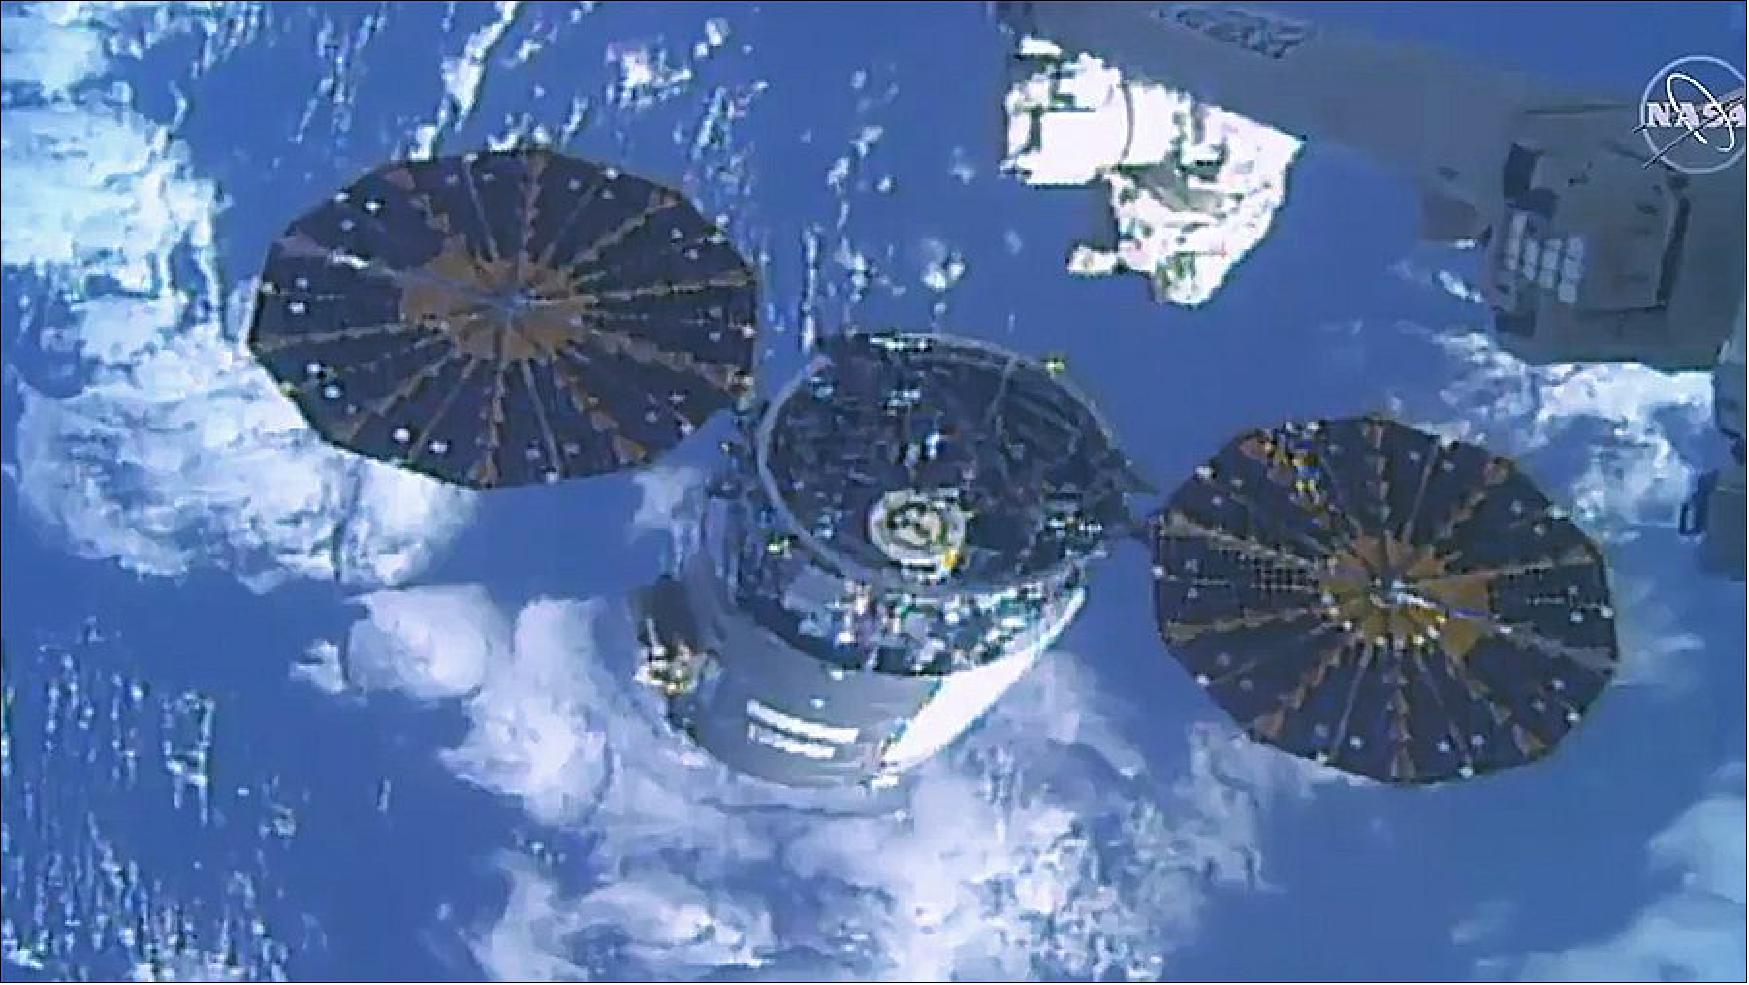 Figure 5: In this frame from NASA TV, the U.S. Cygnus space freighter from Northrop Grumman is pictured moments after being released from the space station’s Canadarm2 robotic arm (image credit: NASA)